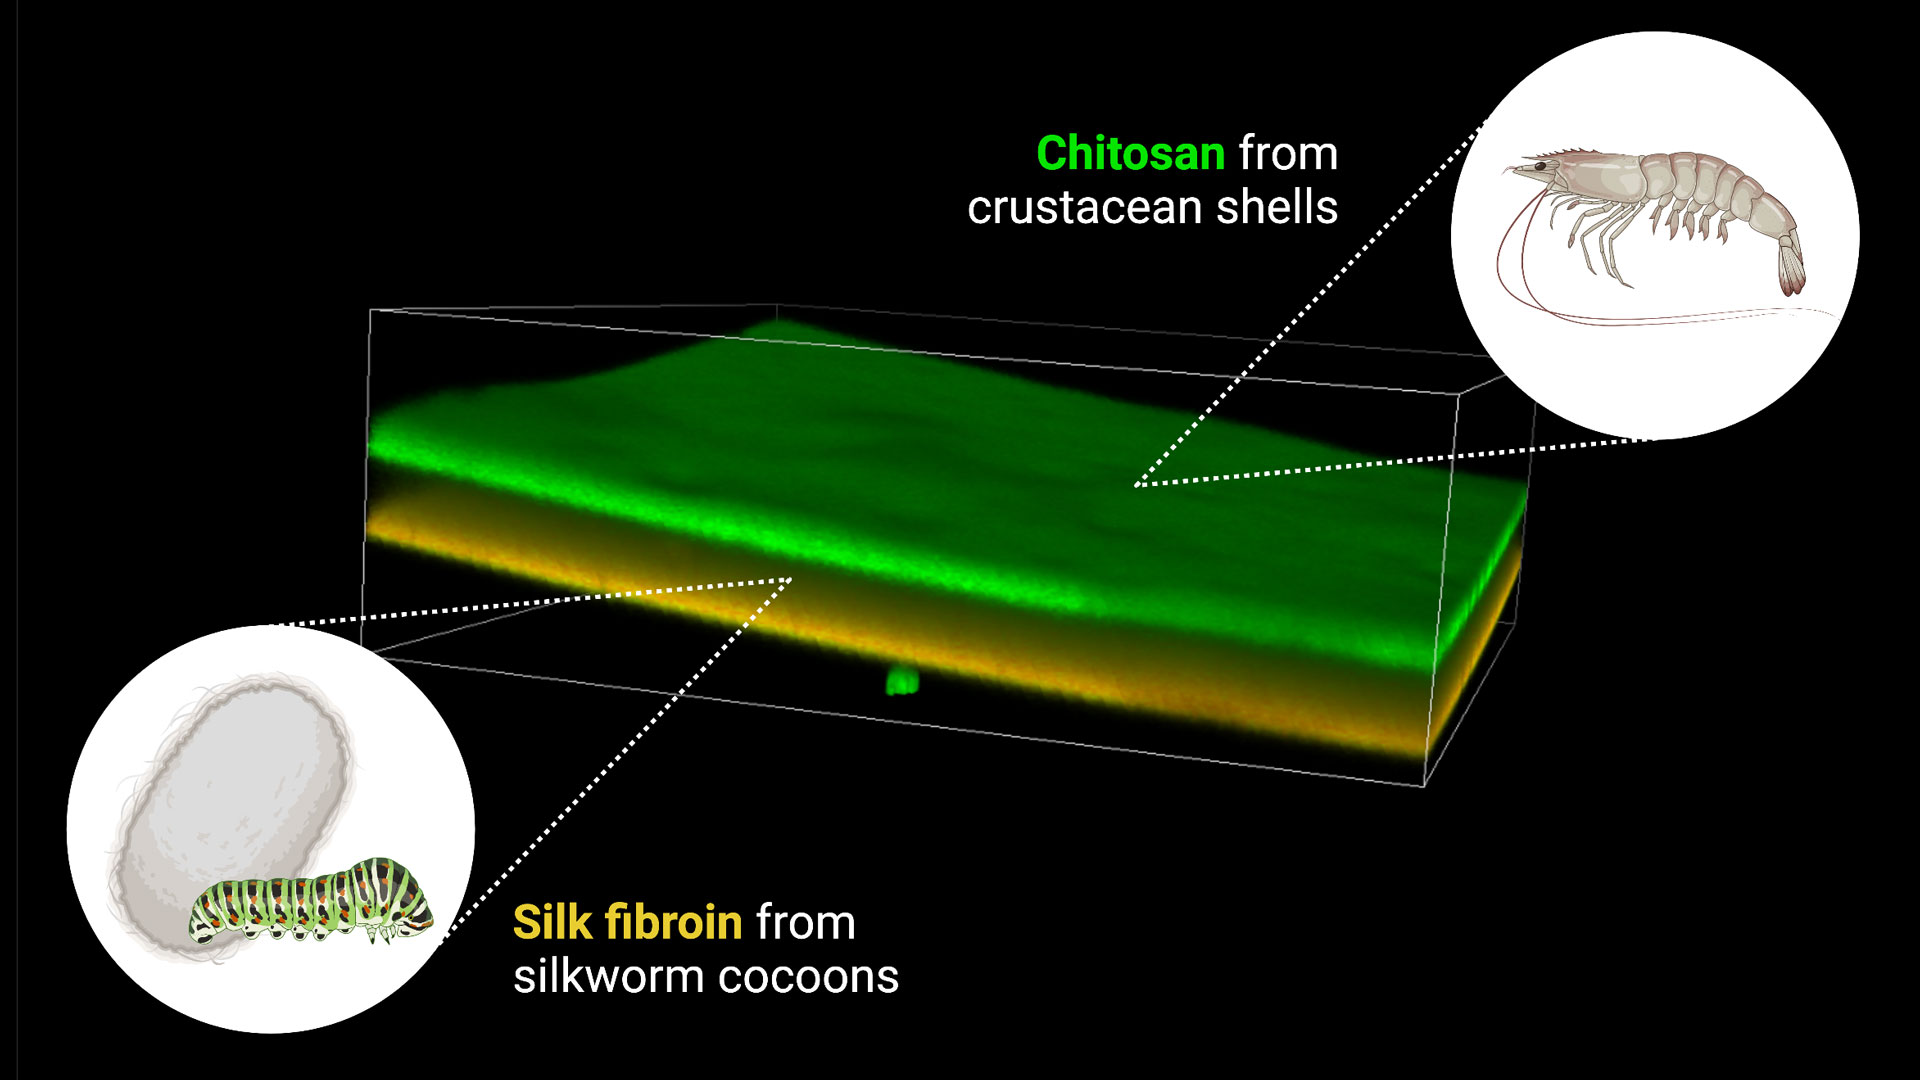 A graphic shows a composite of chitosan from crustacean shells and silk fibroin from silkworm cocoons used by ASU researcher Jordan Yaron to generate a smart wound dressing. 